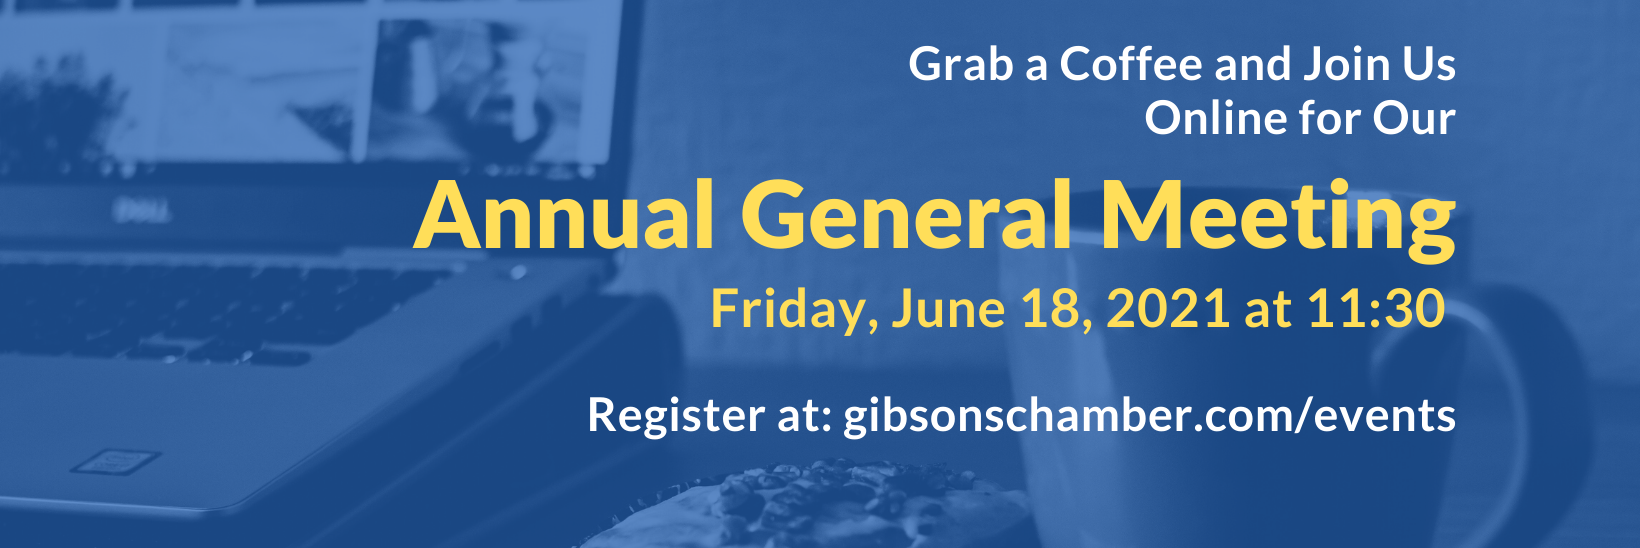 Join us for our AGM Friday June 18, 2021